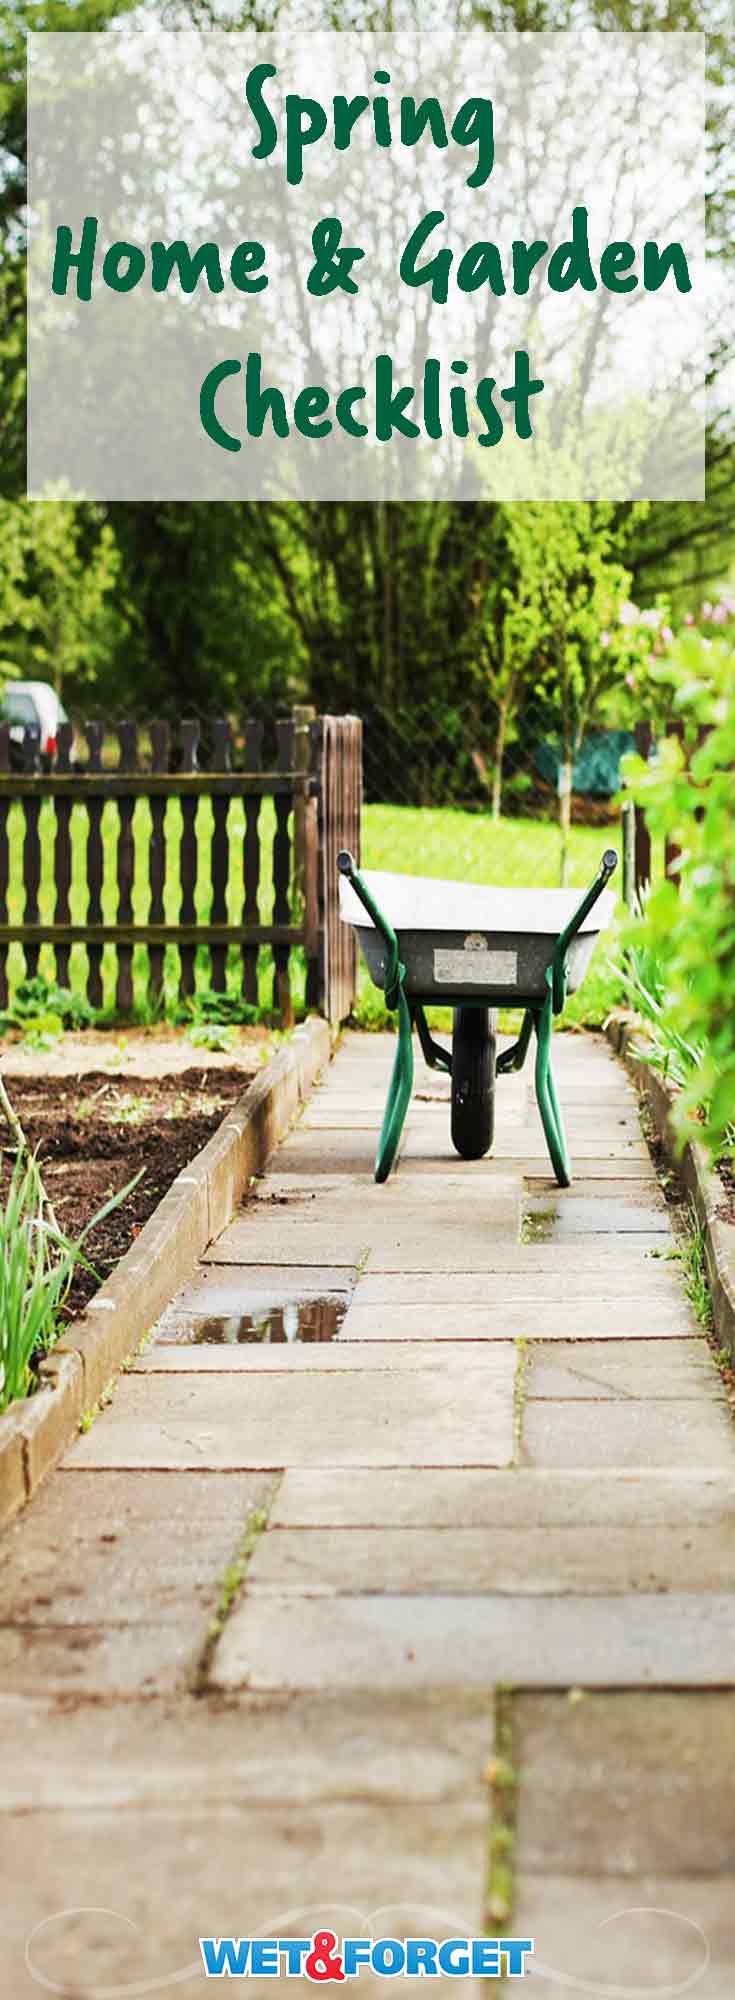 Winter weather can cause a lot of wear and tear your home and garden. Revive your home and garden for the spring with this easy checklist! 